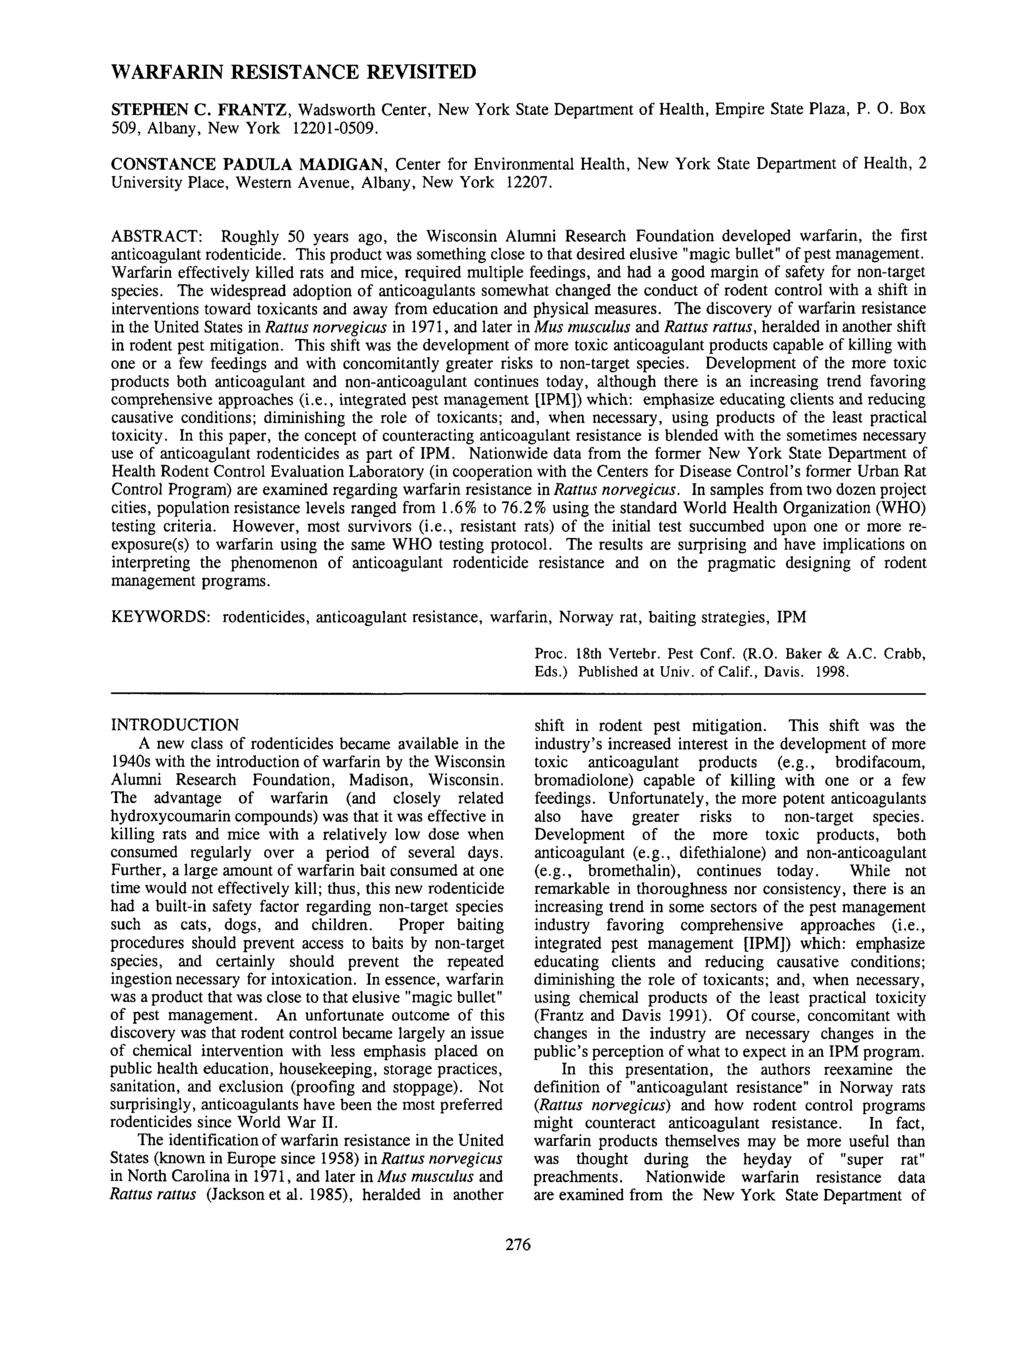 WARFARIN RESISTANCE REVISITED STEPHEN C. FRANTZ, Wadsworth Center, New York State Department of Health, Empire State Plaza, P. 0. Box 509, Albany, New York 12201-0509.